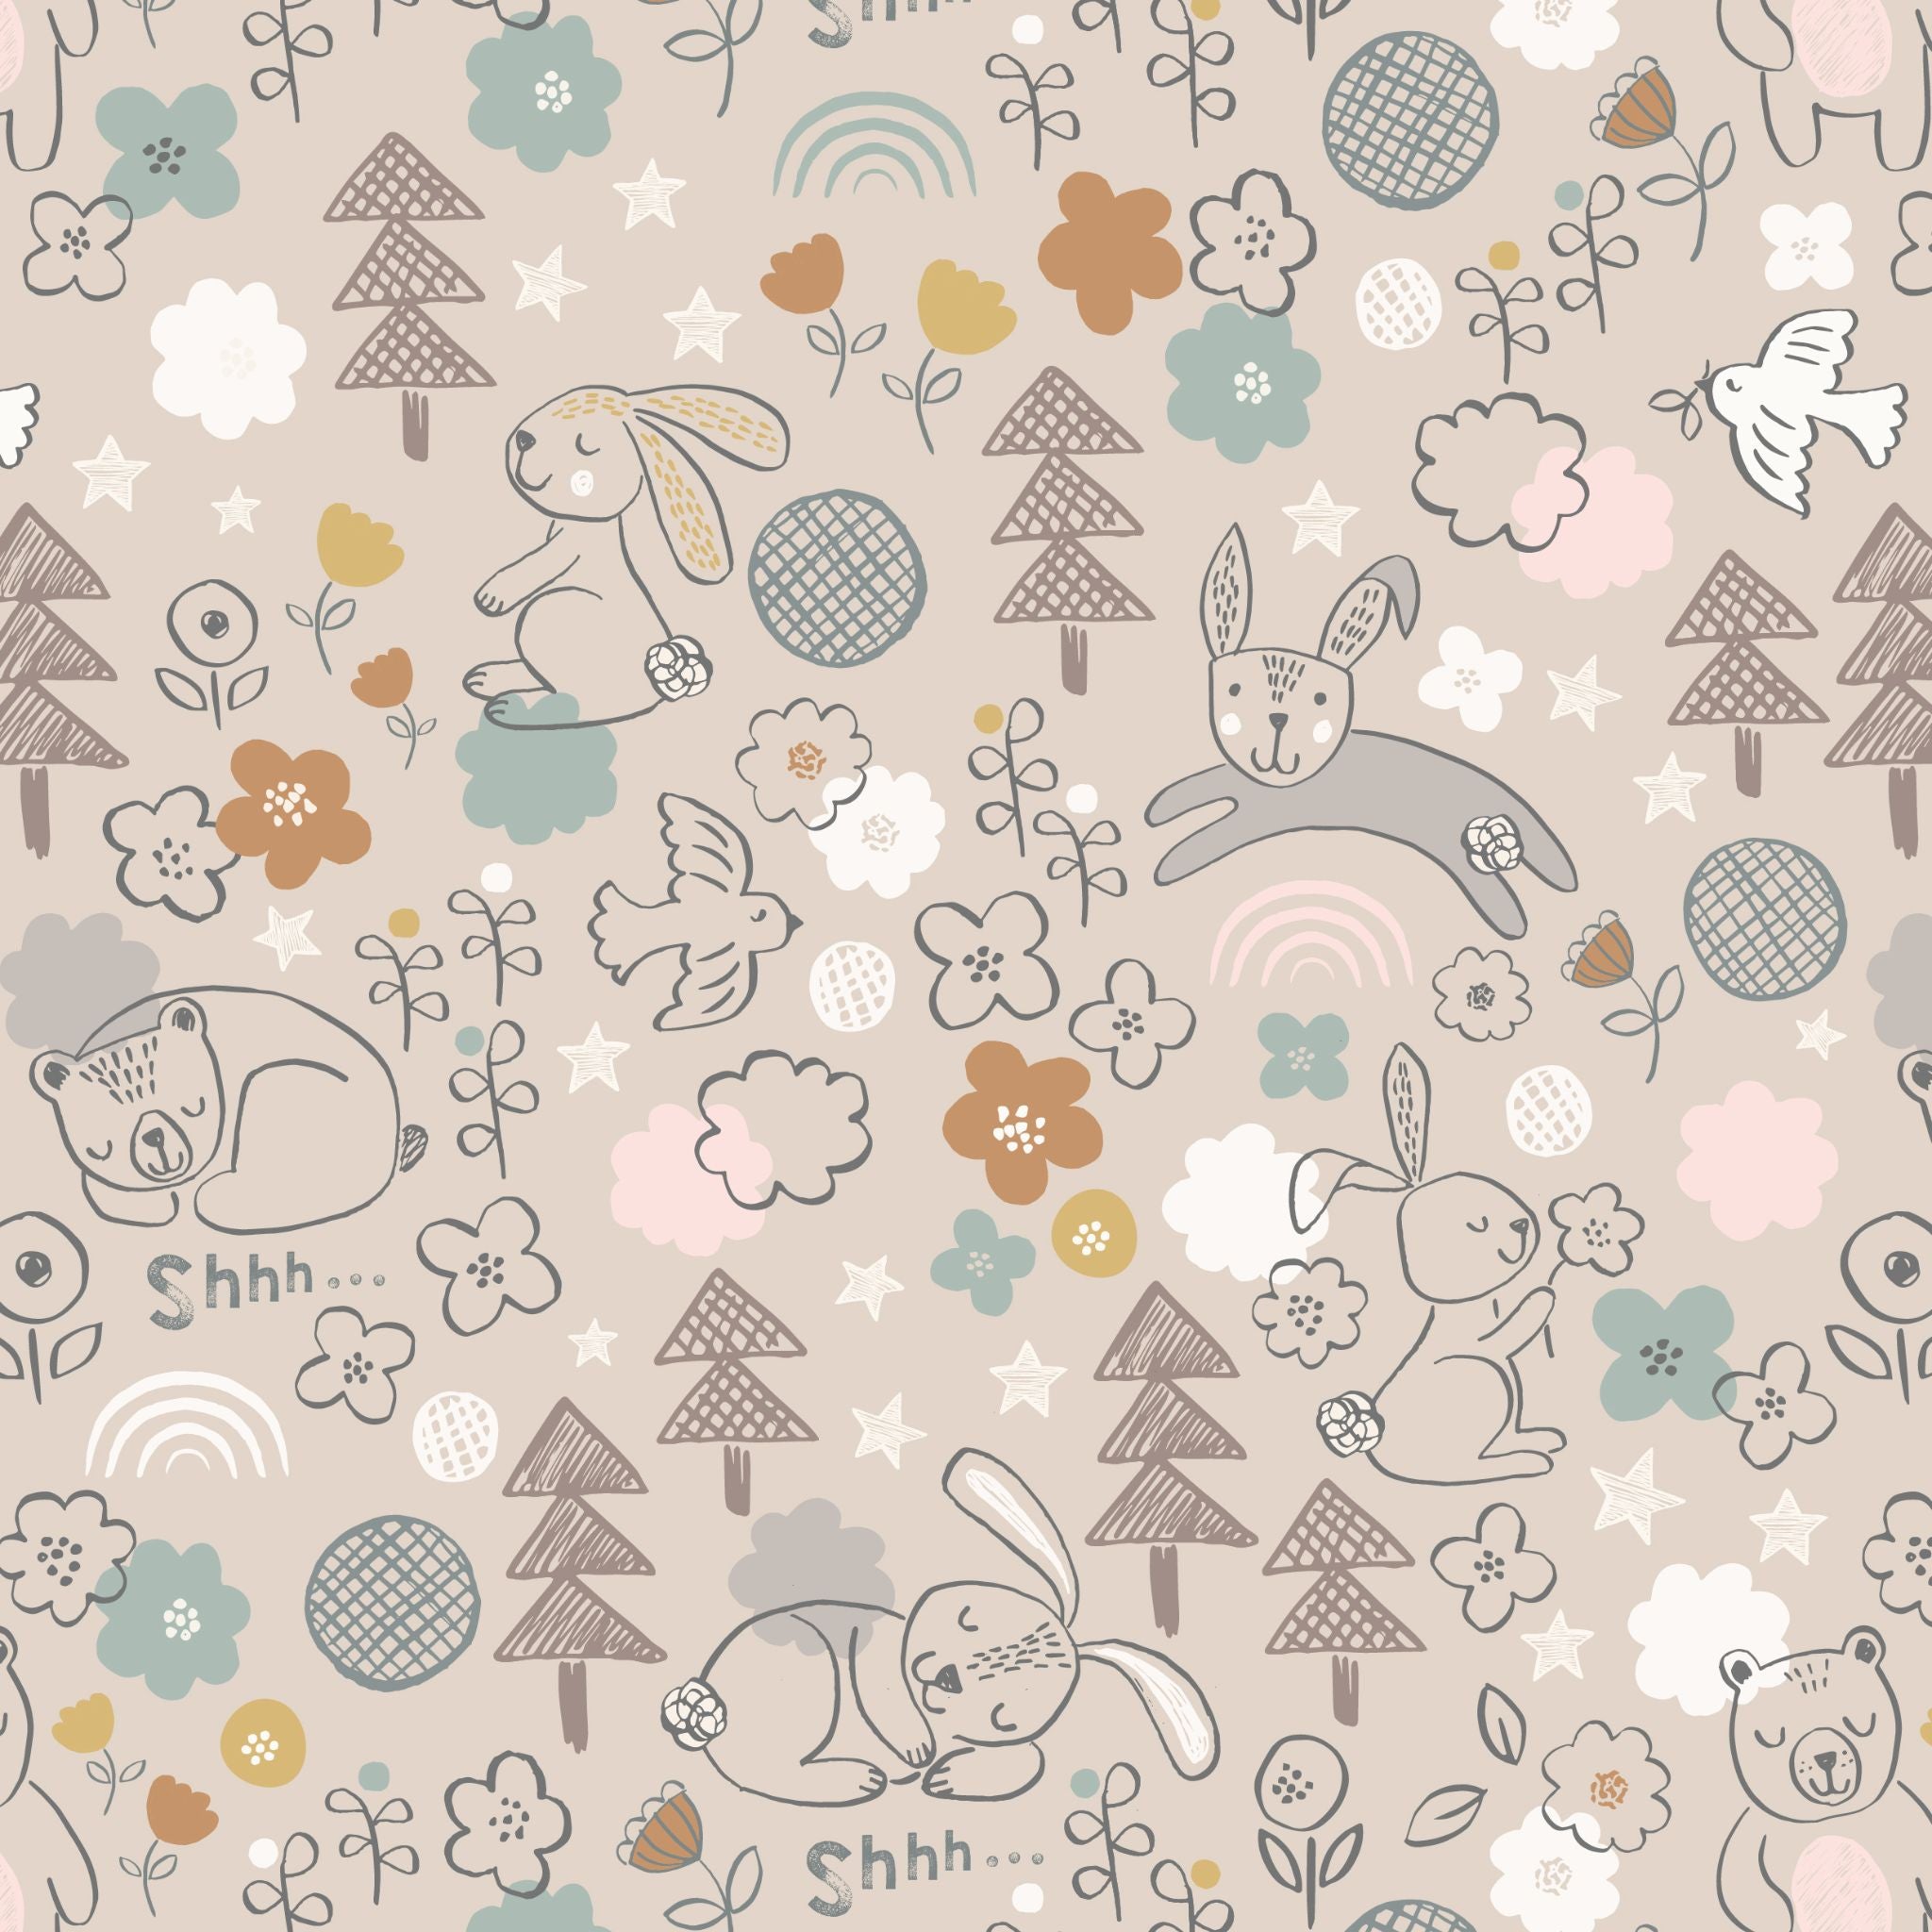 Rabbits and Bears on beige 100% cotton fabric - Bella Bunny & Bear by Lewis & Irene